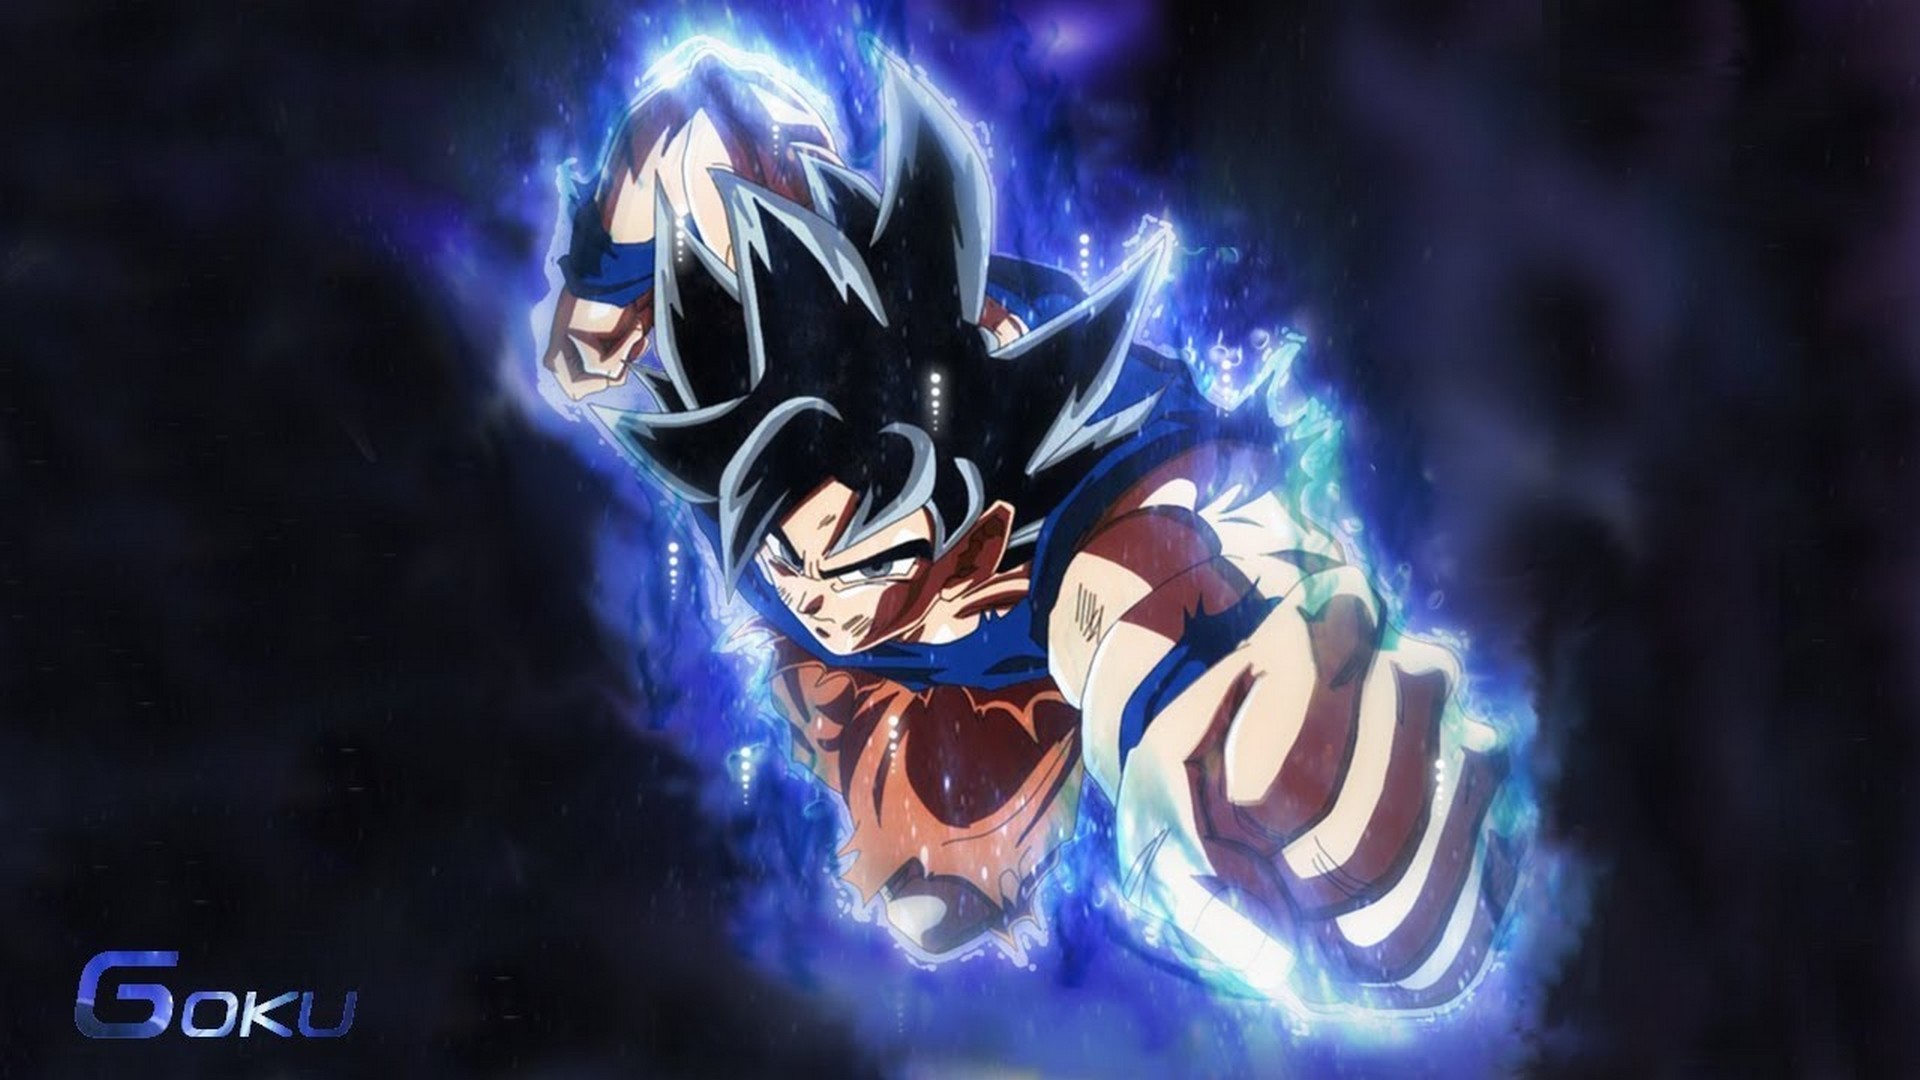 Goku Images Desktop Wallpaper with resolution 1920X1080 pixel. You can use this wallpaper as background for your desktop Computer Screensavers, Android or iPhone smartphones